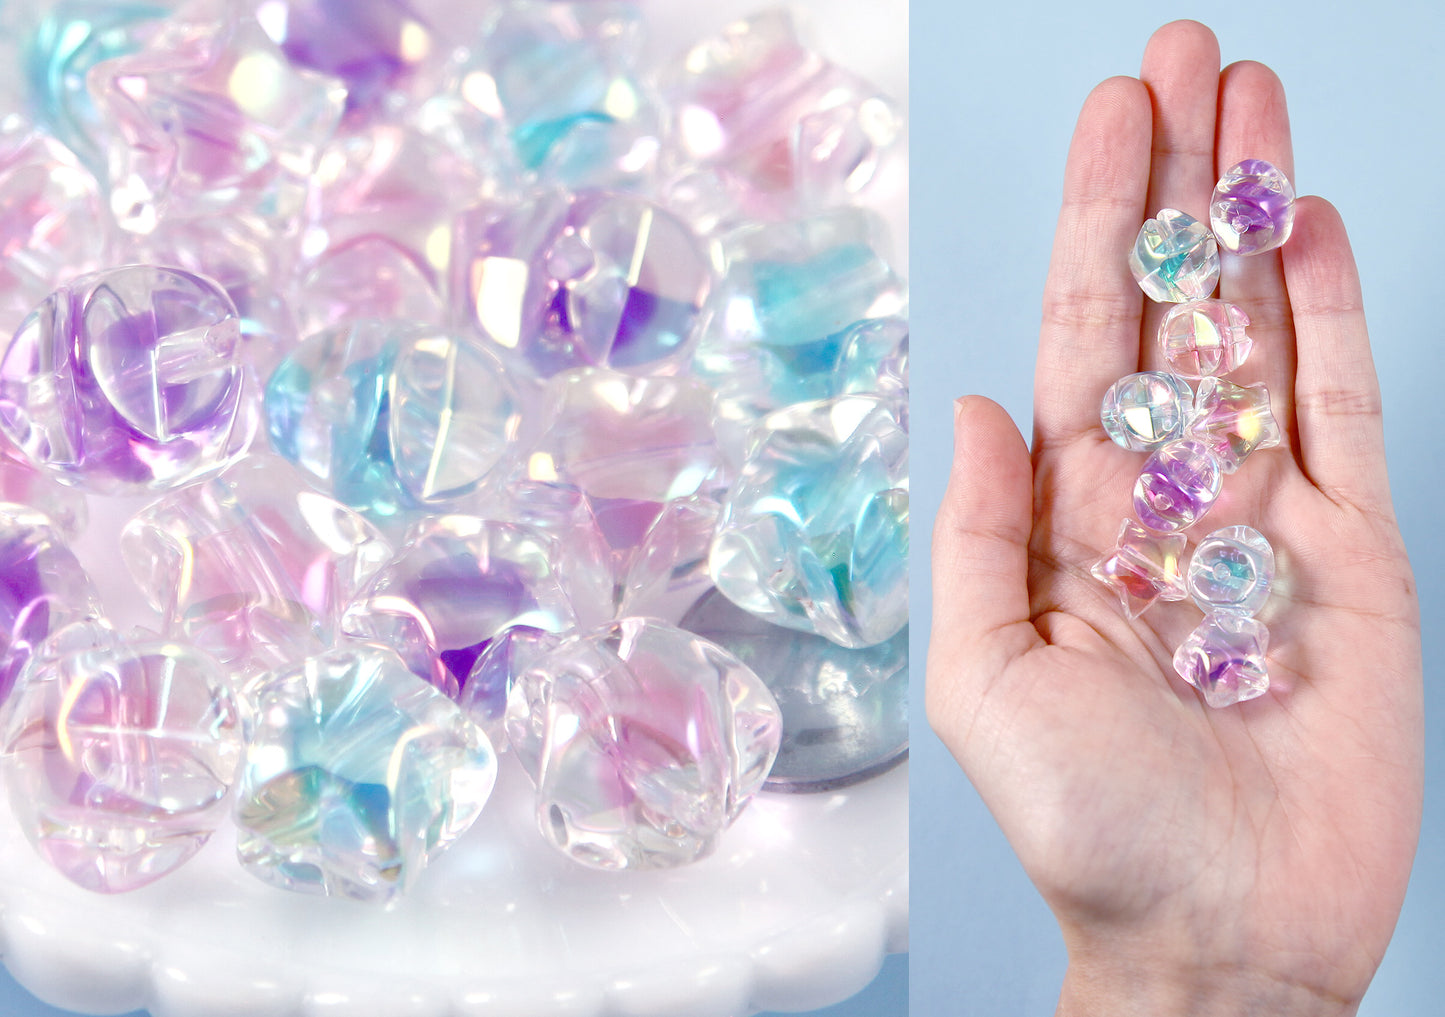 Pastel Star Beads - 15mm Amazing Double Bead Pastel 3D Star Acrylic or Resin Beads - 21 pcs set